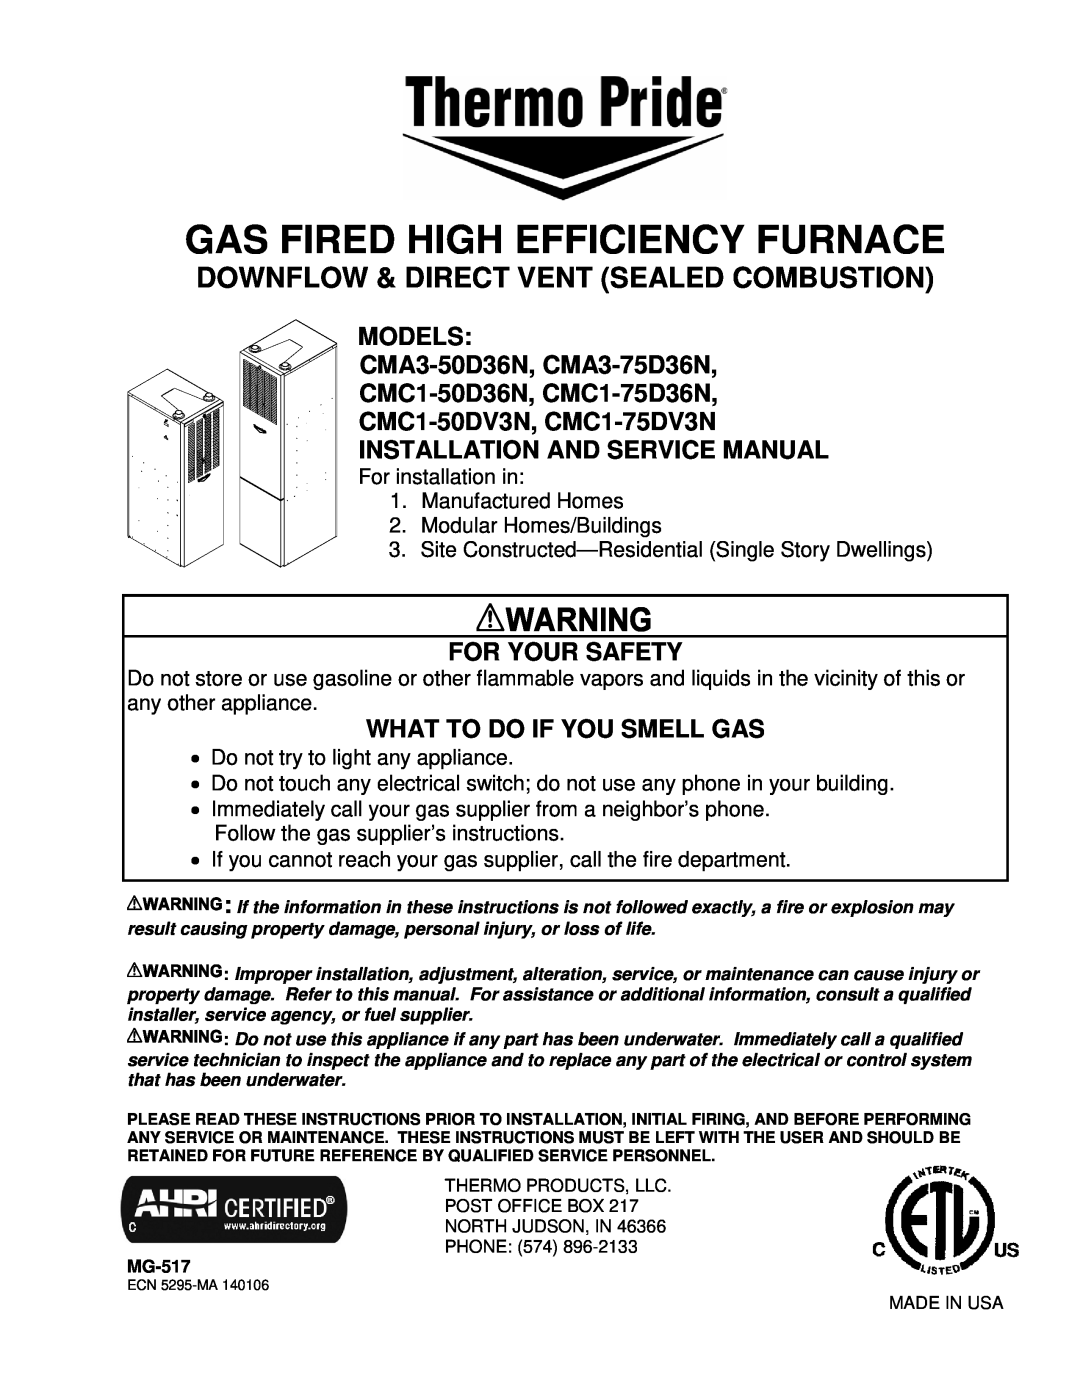 Thermo Products CMC1-50D36N service manual MODELS CMA3-50D36N, CMA3-75D36N, For Your Safety, What To Do If You Smell Gas 